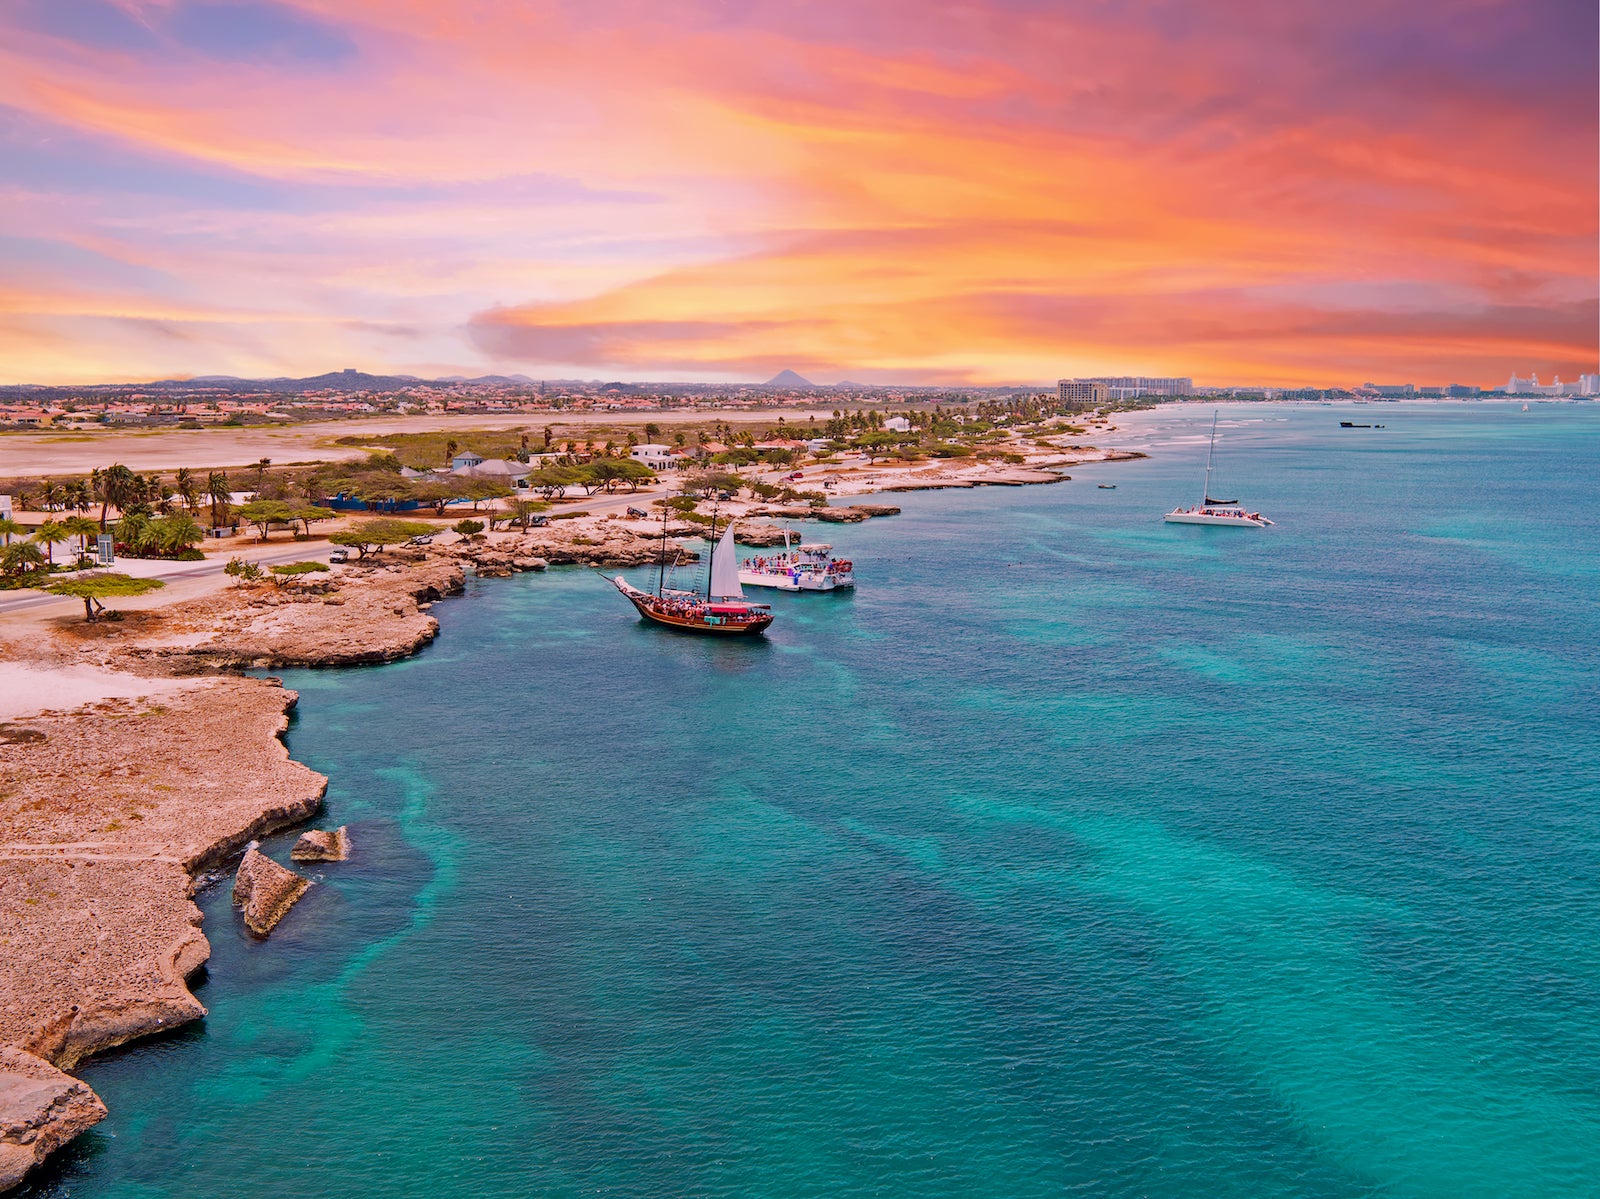 Round-trip flights to Aruba for as low as $290